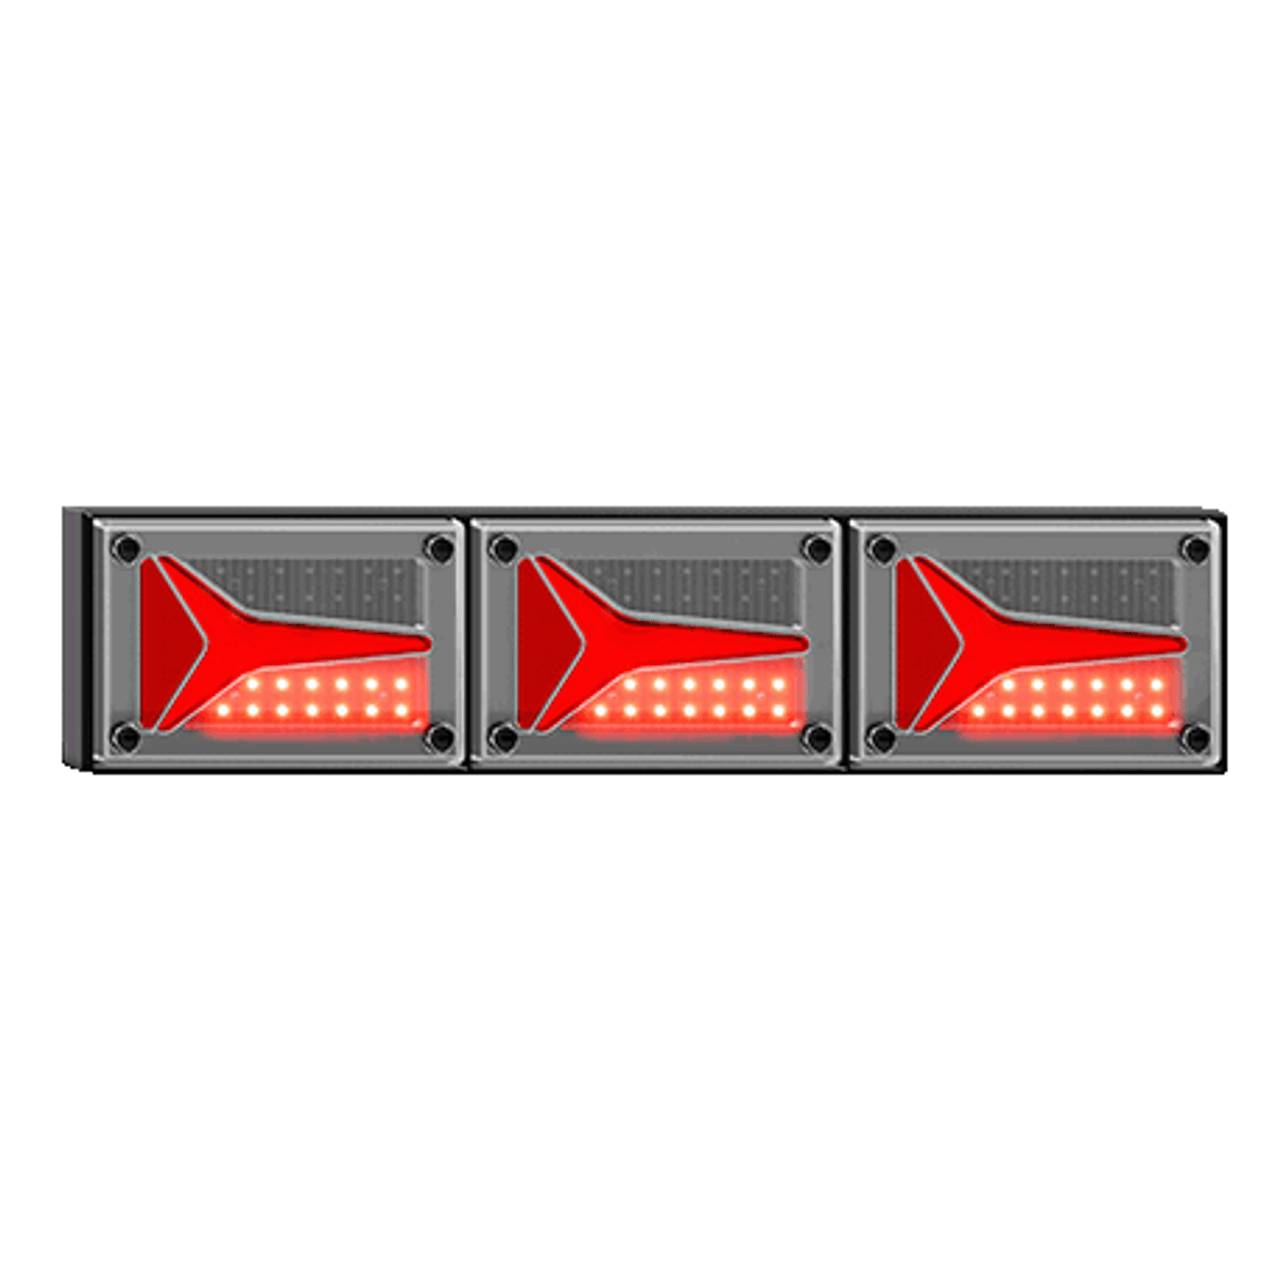 595STIM3-2 - Combination Tail Light. Clear Lens. Large Tray & Truck Series Light. Diffused Tail Function. Sequential Indicator. Coloured Lens. Stop, Tail and Indicator Lights. Caravan Friendly. Twin Pack. Multi-Volt 12v & 24v. Autolamps. Ultimate LED. 